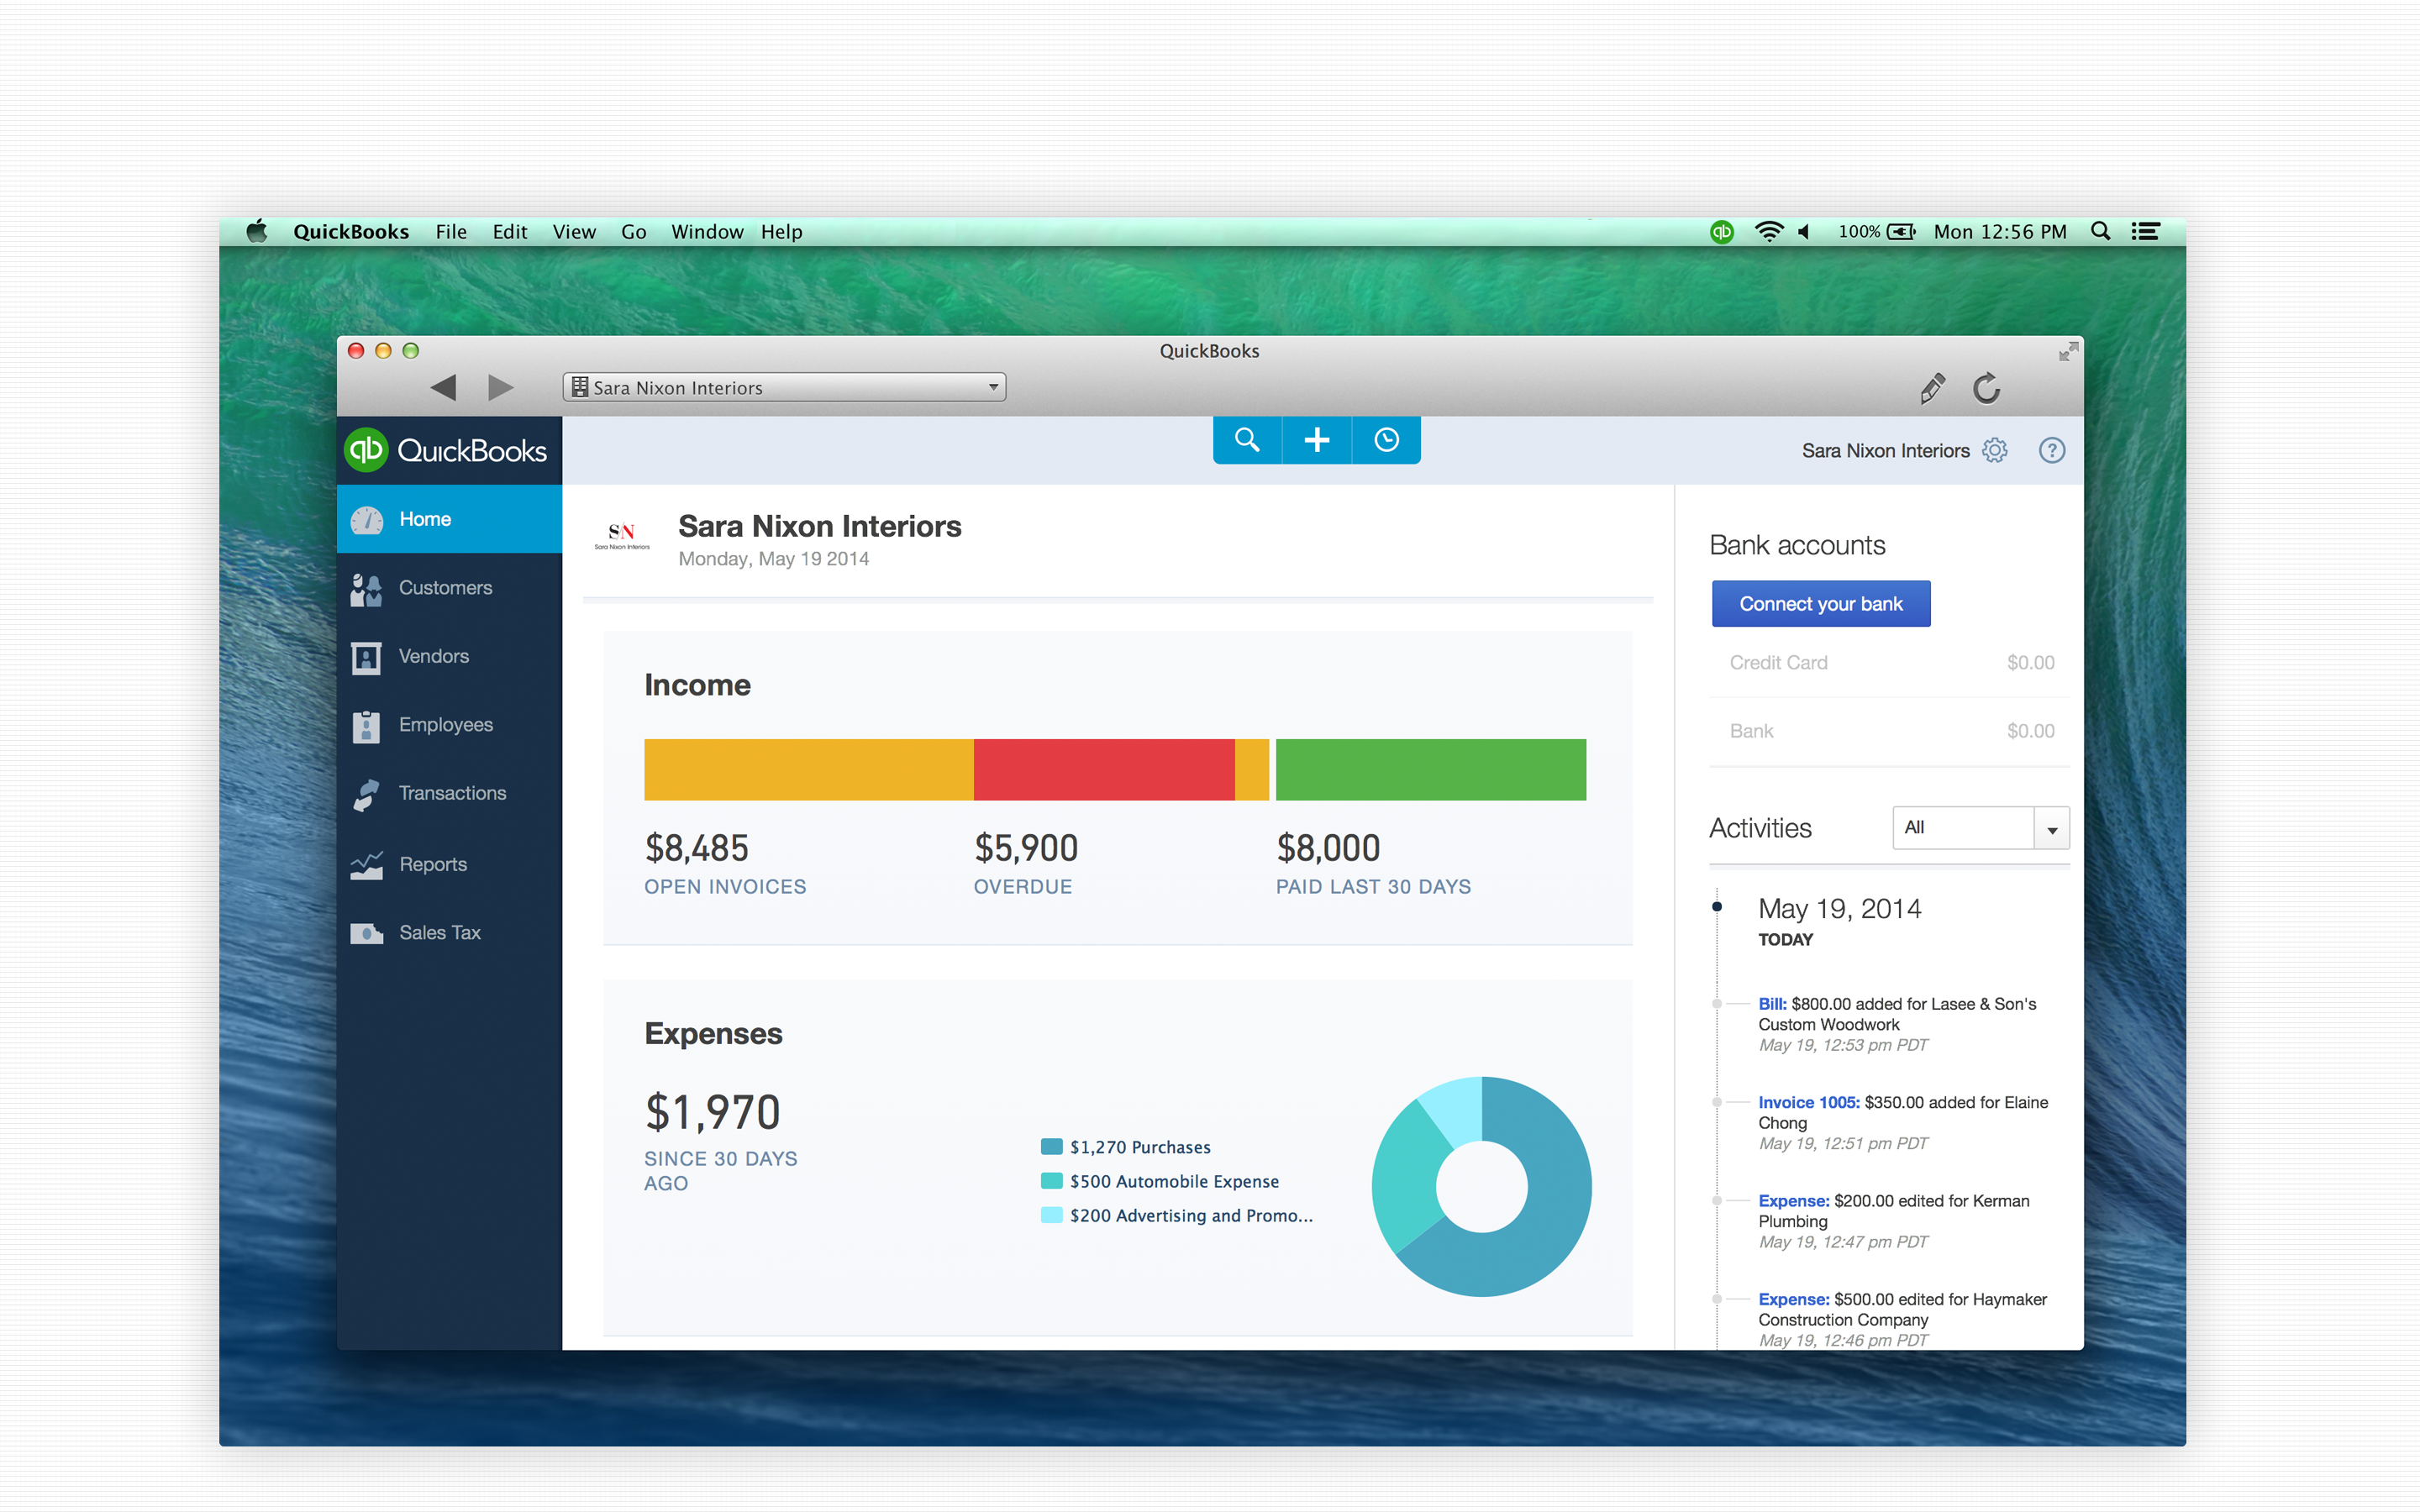 what is the latest quickbooks version for mac